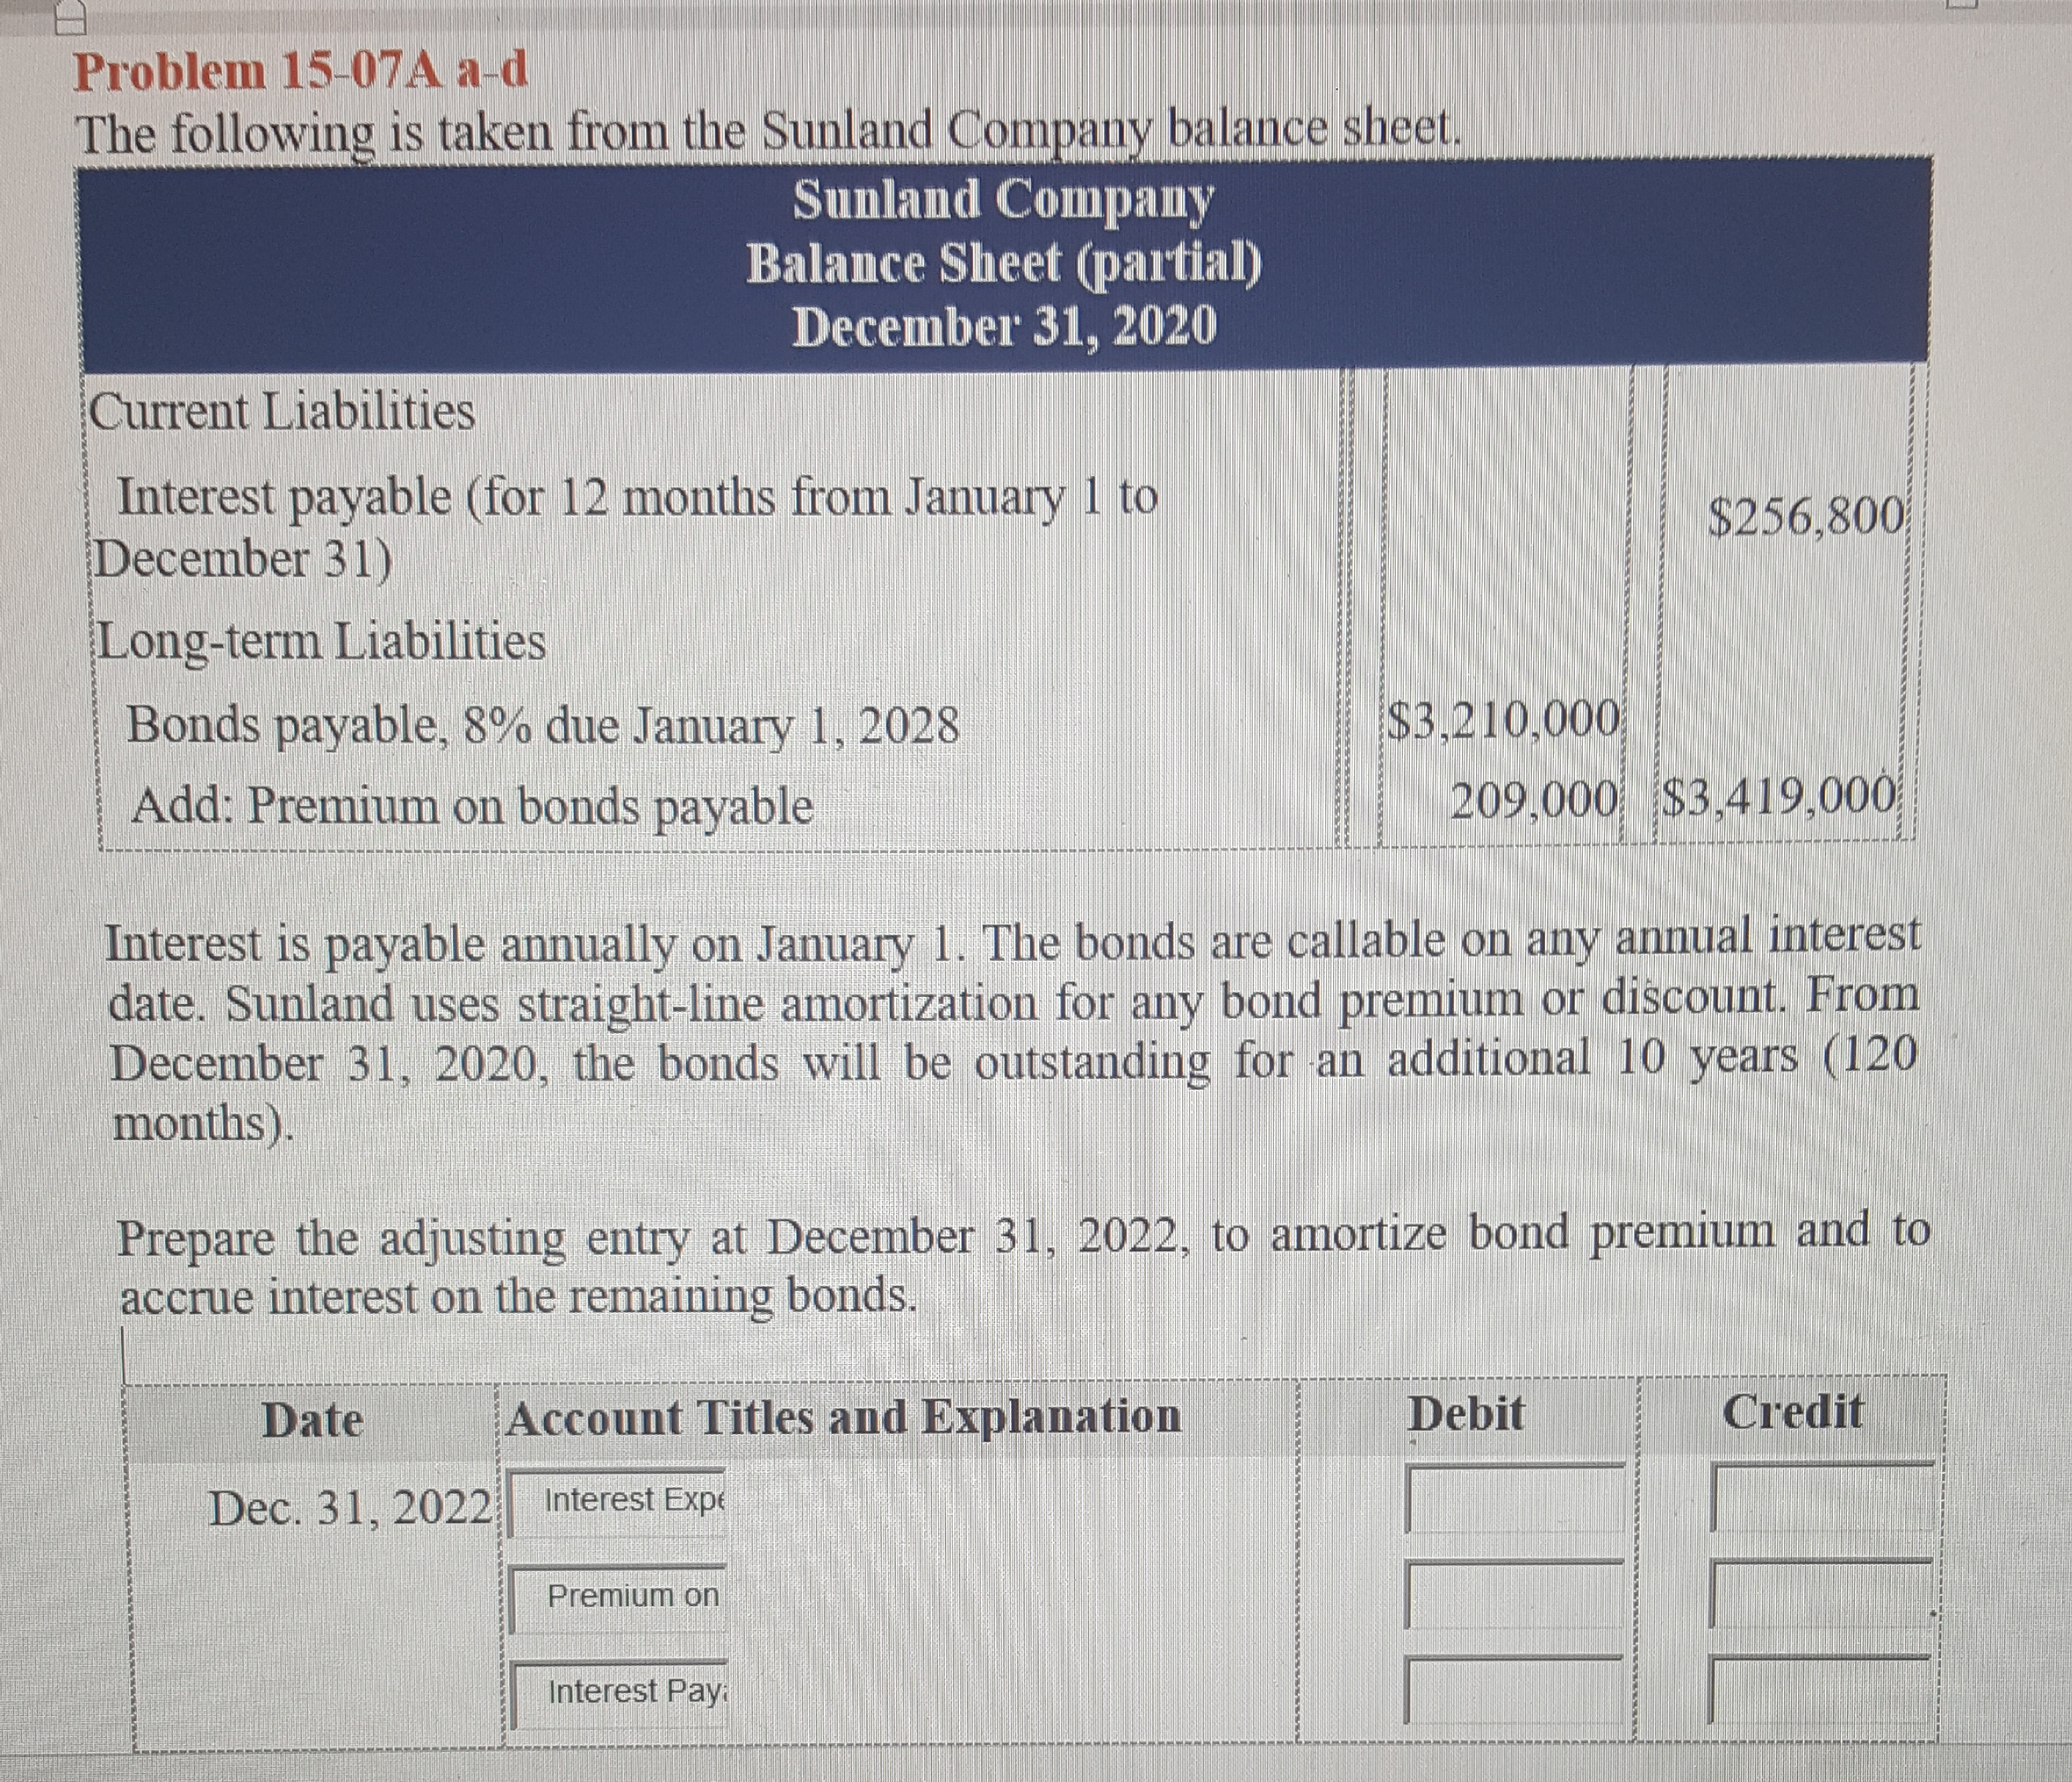 Problem 15-07A a-d
The following is taken from the Sunland Company balance sheet.
Sunland Company
Balance Sheet (partial)
December 31, 2020
Current Liabilities
Interest payable (for 12 months from January 1 to
December 31)
$256,800
Long-term Liabilities
Bonds payable, 8% due January 1, 2028
$3,210,000
Add: Premium on bonds payable
209,000 $3,419,000
Interest is payable annually on January 1. The bonds are callable on any annual interest
date. Sunland uses straight-line amortization for any bond premium or discount. From
December 31, 2020, the bonds will be outstanding for an additional 10 years (120
months).
Prepare the adjusting entry at December 31, 2022, to amortize bond premium and to
accrue interest on the remaining bonds.
Date
Account Titles and Explanation
Debit
Credit
Dec. 31, 2022
Interest Expe
Premium on
Interest Pay:
